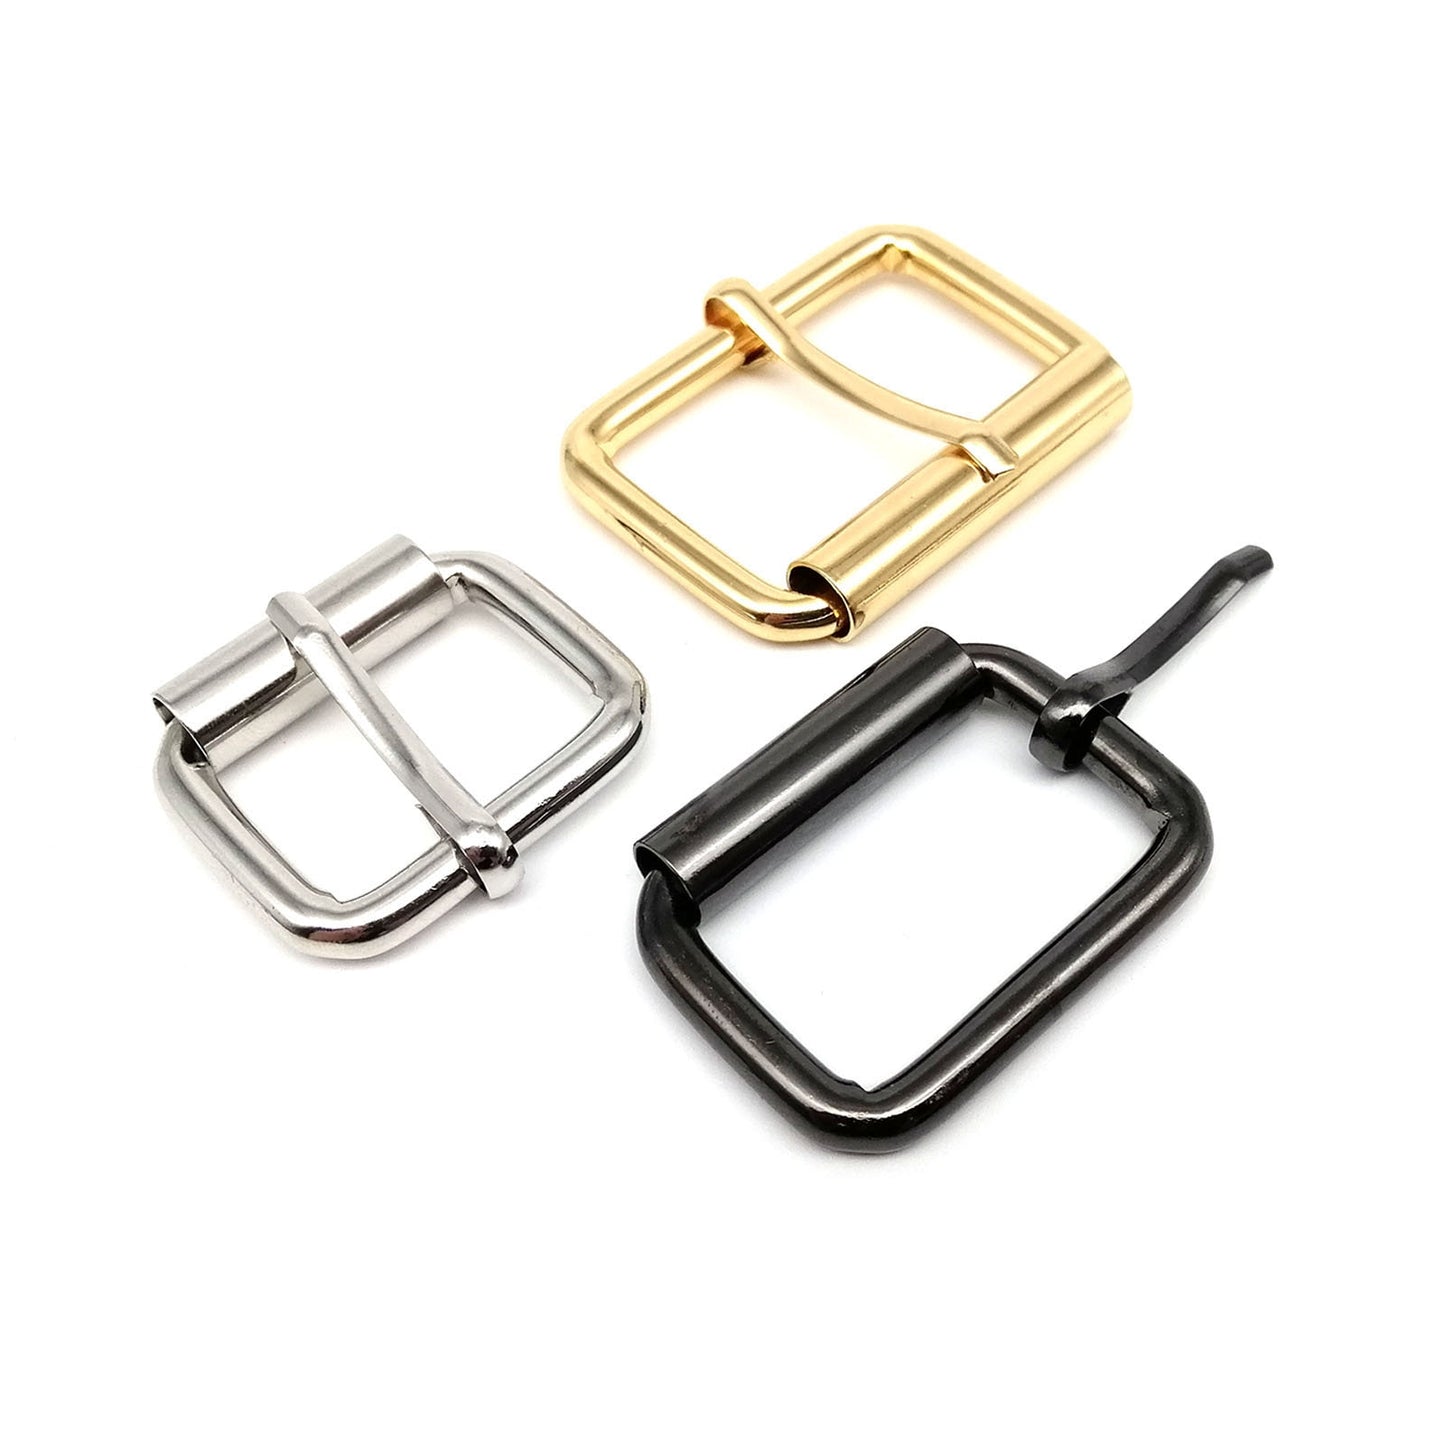 Square buckles pack 5 units.